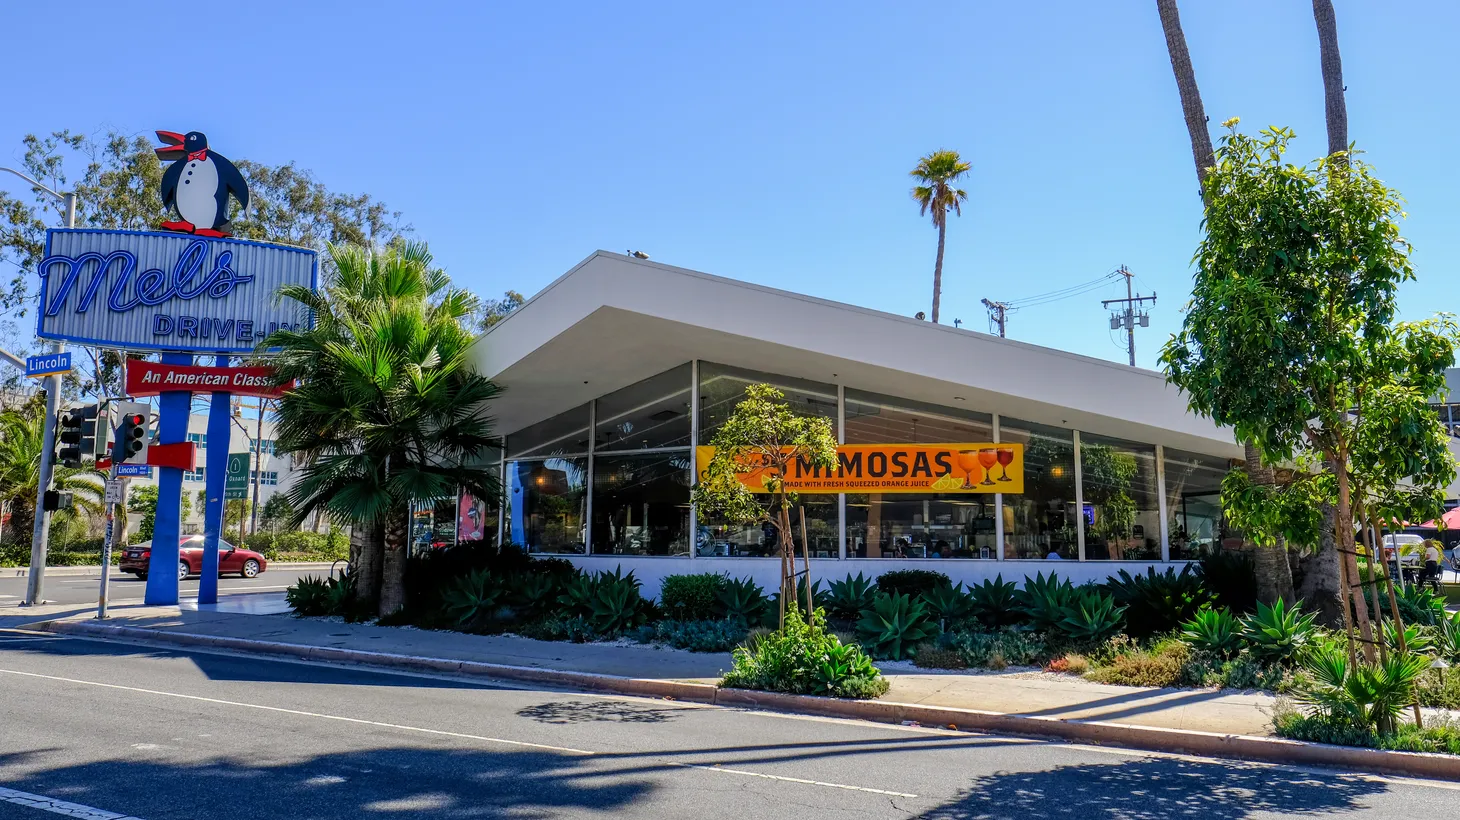 Mel’s Drive-in Restaurant is located along Lincoln Blvd., at the corner of Olympic Blvd. “These [Googie-style] buildings were made for that modern lifestyle. They grabbed your attention as you drove down Lincoln Boulevard or Ventura Boulevard at 30-40 miles an hour. … You knew exactly what they were through the plate glass windows. You can see that there were people enjoying the restaurant,” says co-author Alan Hess.